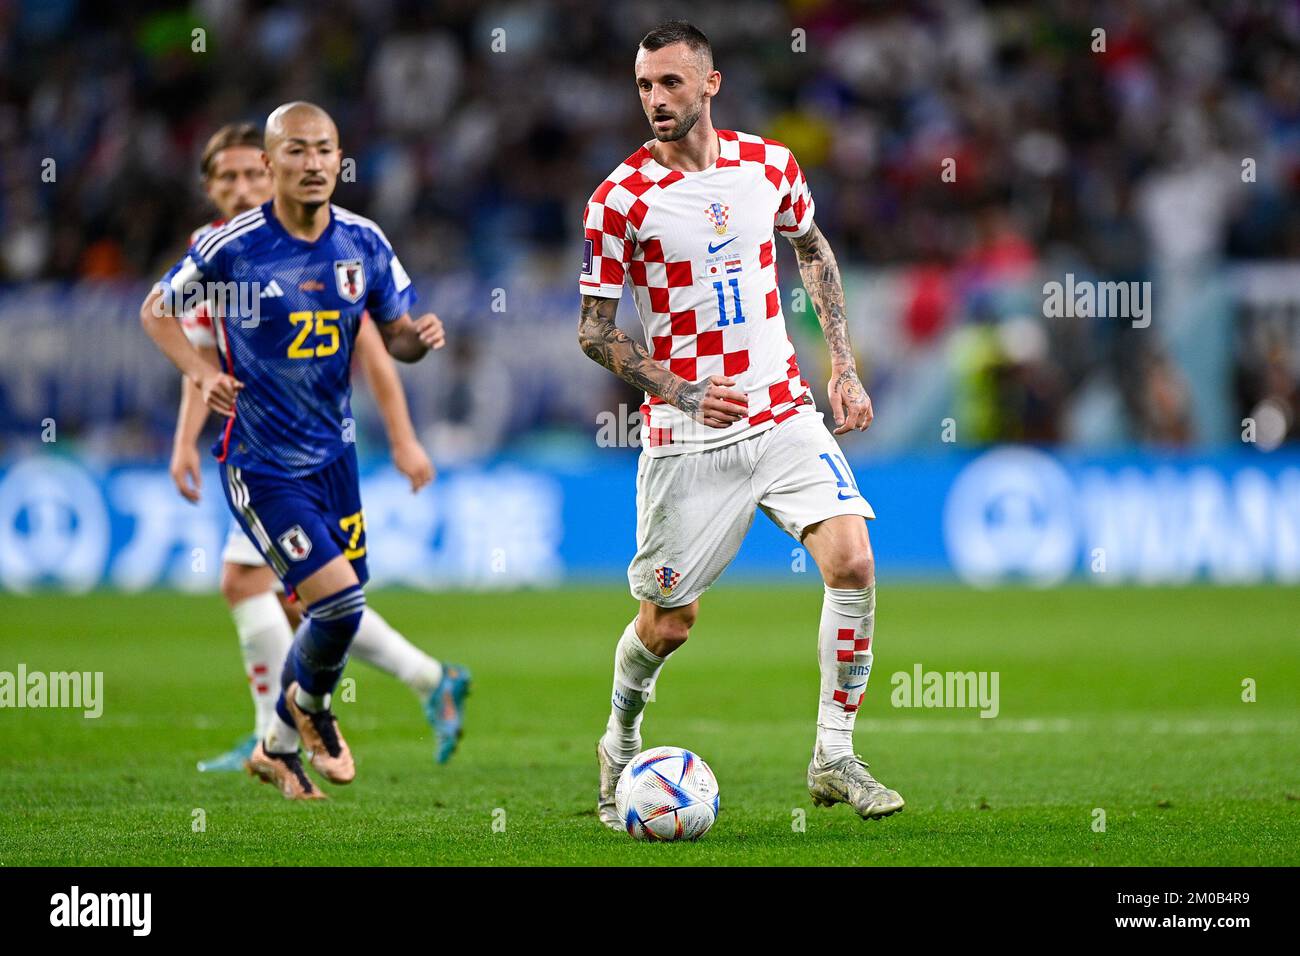 AL WAKRAH, QATAR - DECEMBER 5: Marcelo Brozovic of Croatia in action during the Round of 16 - FIFA World Cup Qatar 2022 match between Japan and Croatia at the Al Janoub Stadium on December 5, 2022 in Al Wakrah, Qatar (Photo by Pablo Morano/BSR Agency) Stock Photo